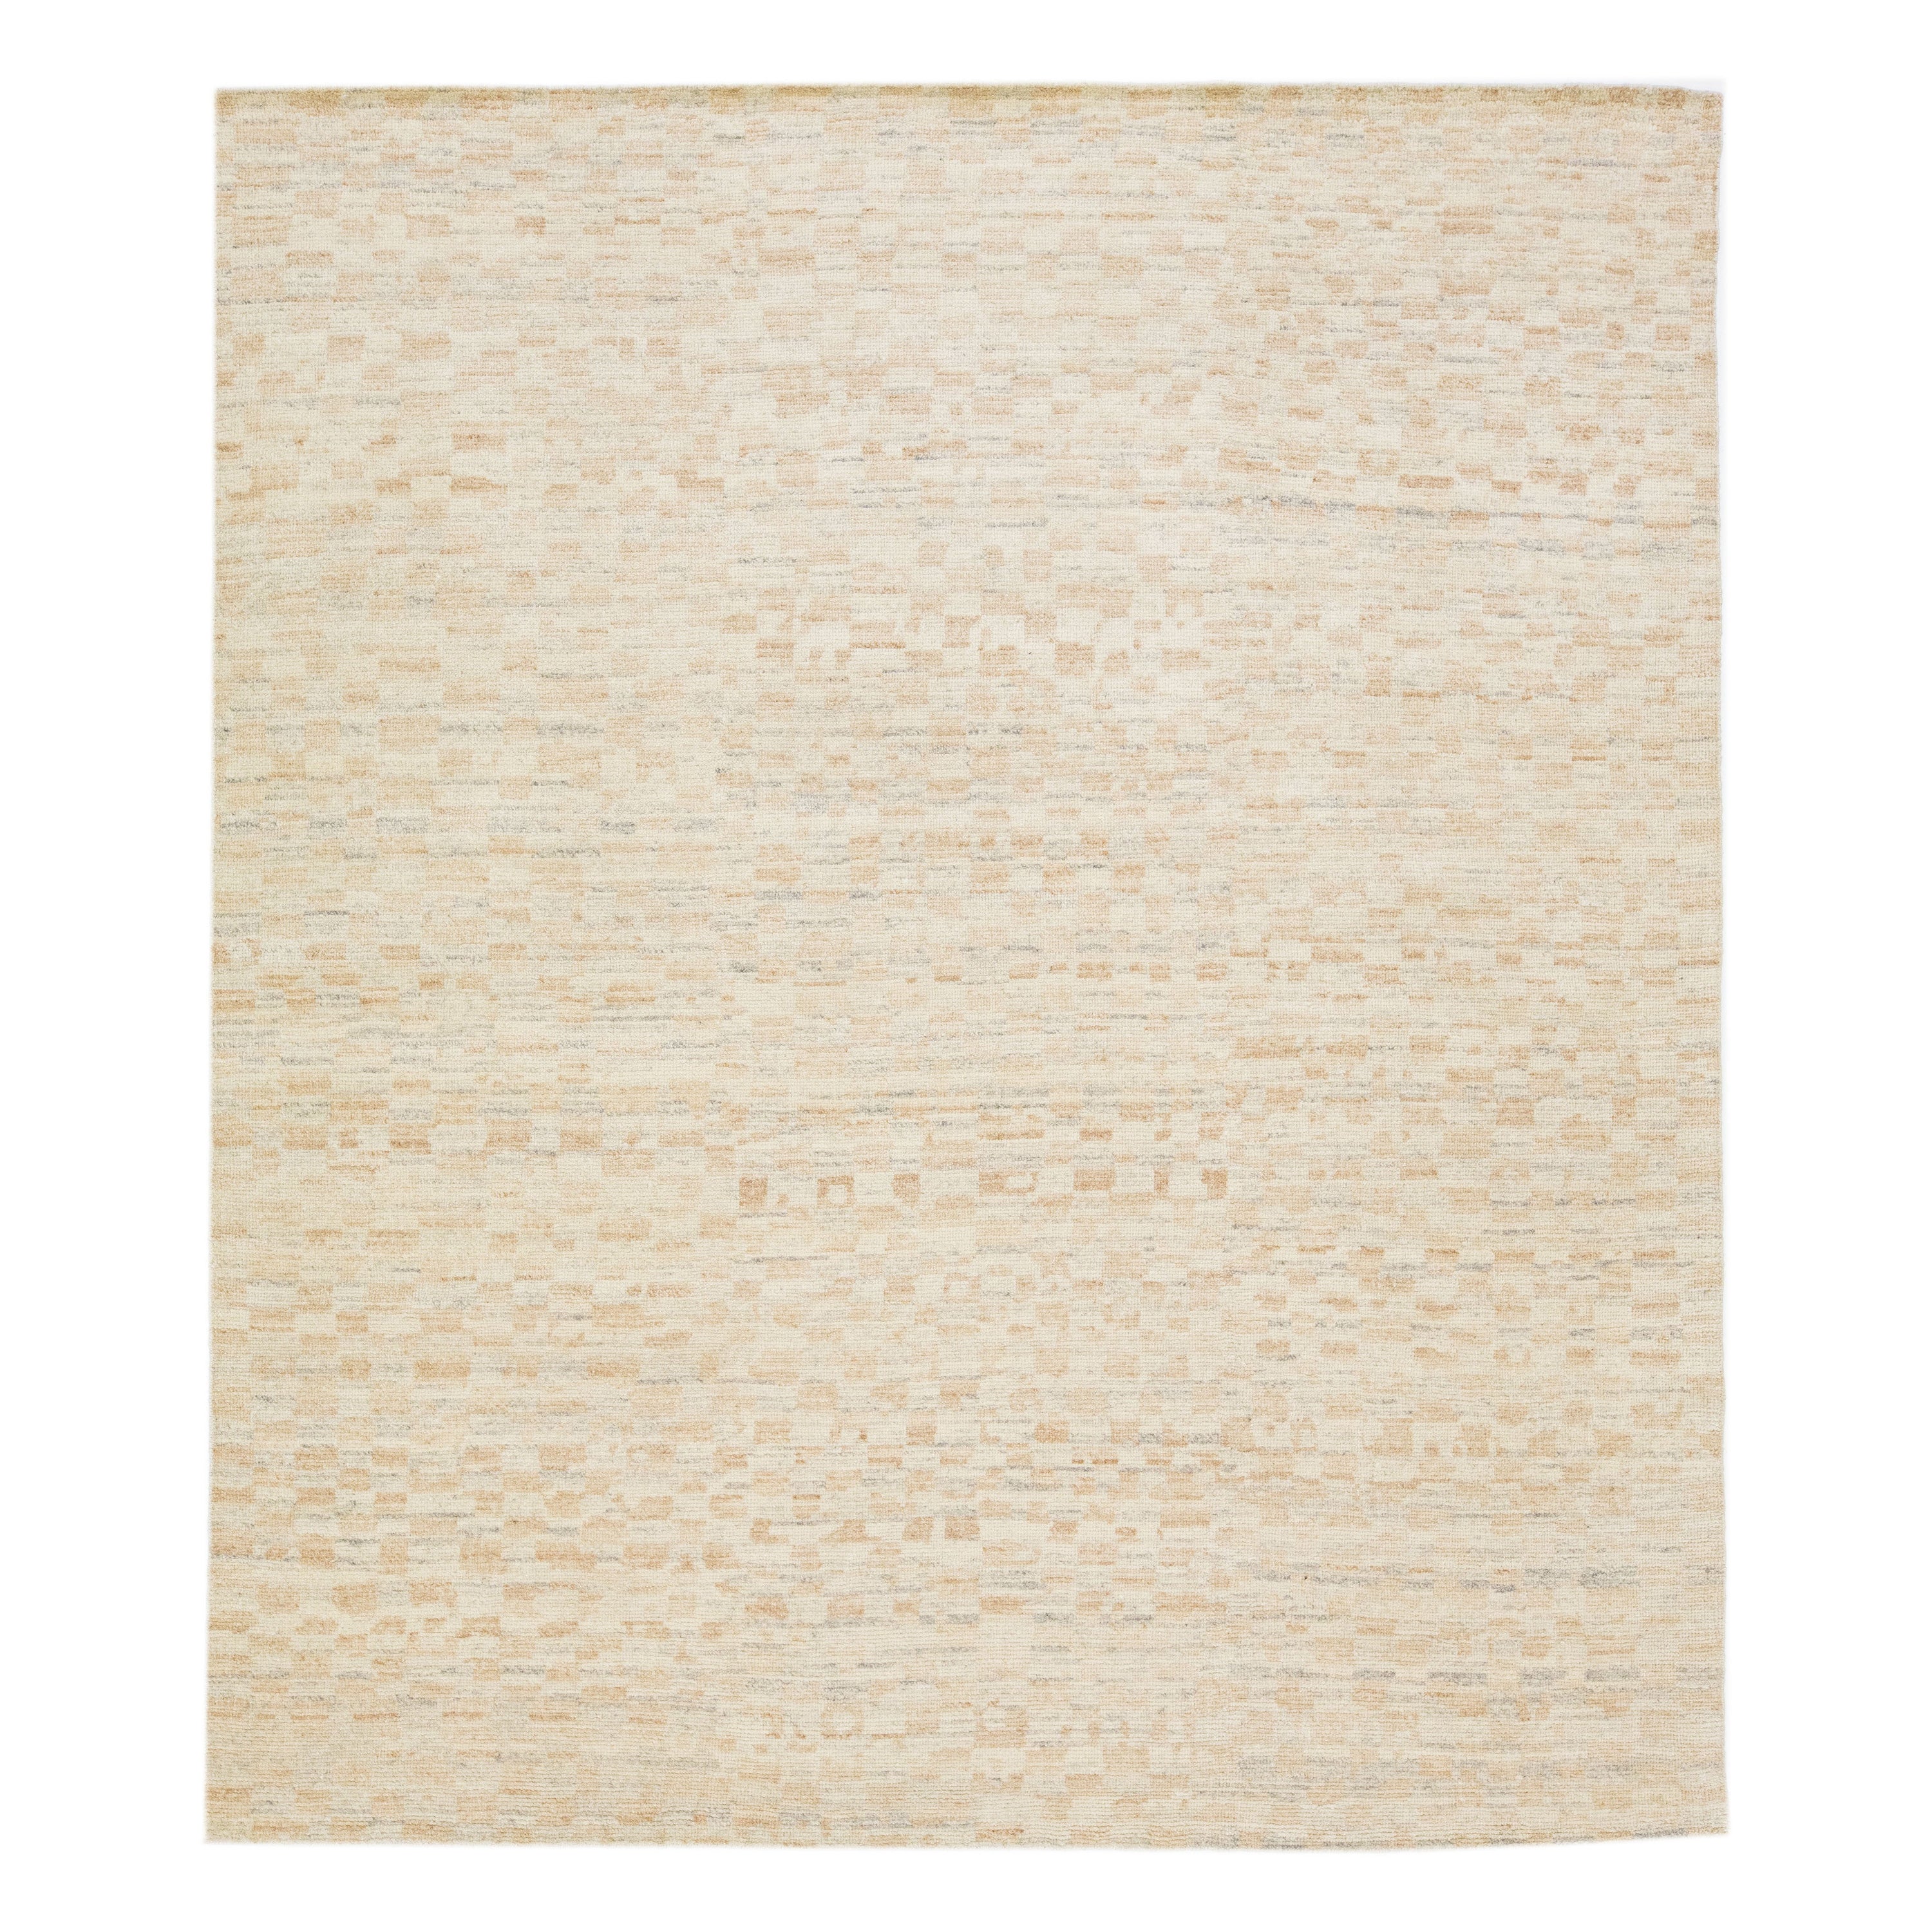 Modern Handmade Moroccan Style Wool Rug With Allover Motif In Beige